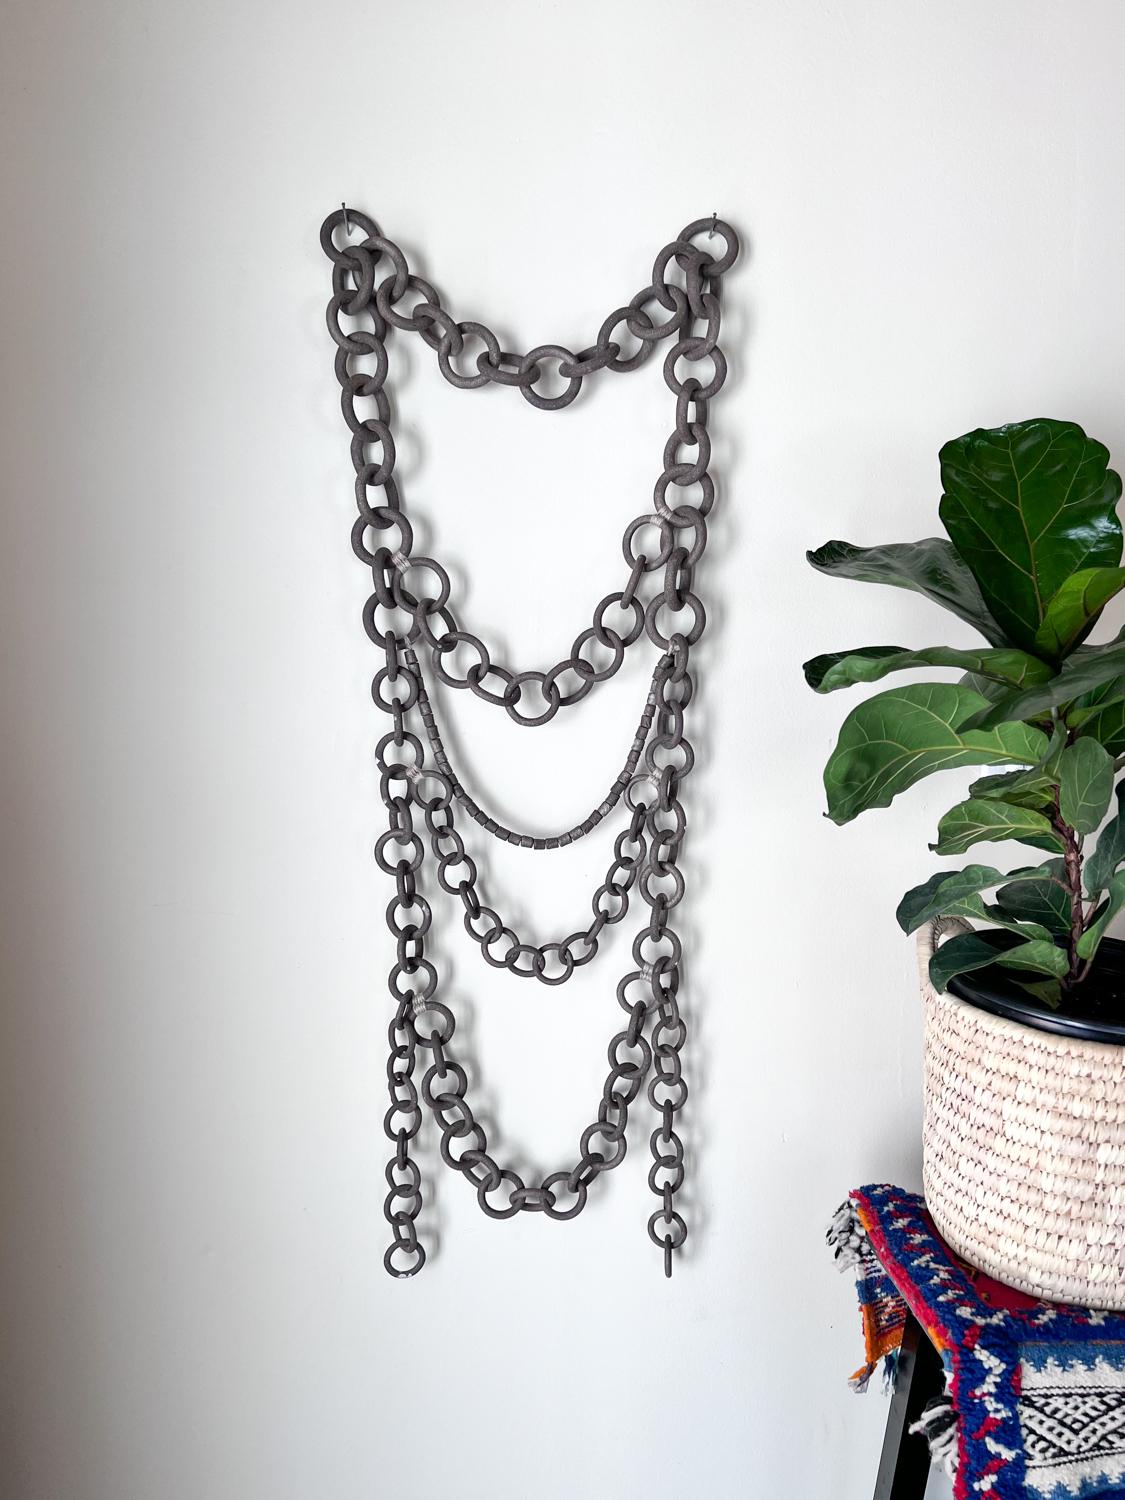 Ceramic Stoneware Link Chain Wall Sculpture For Sale 2